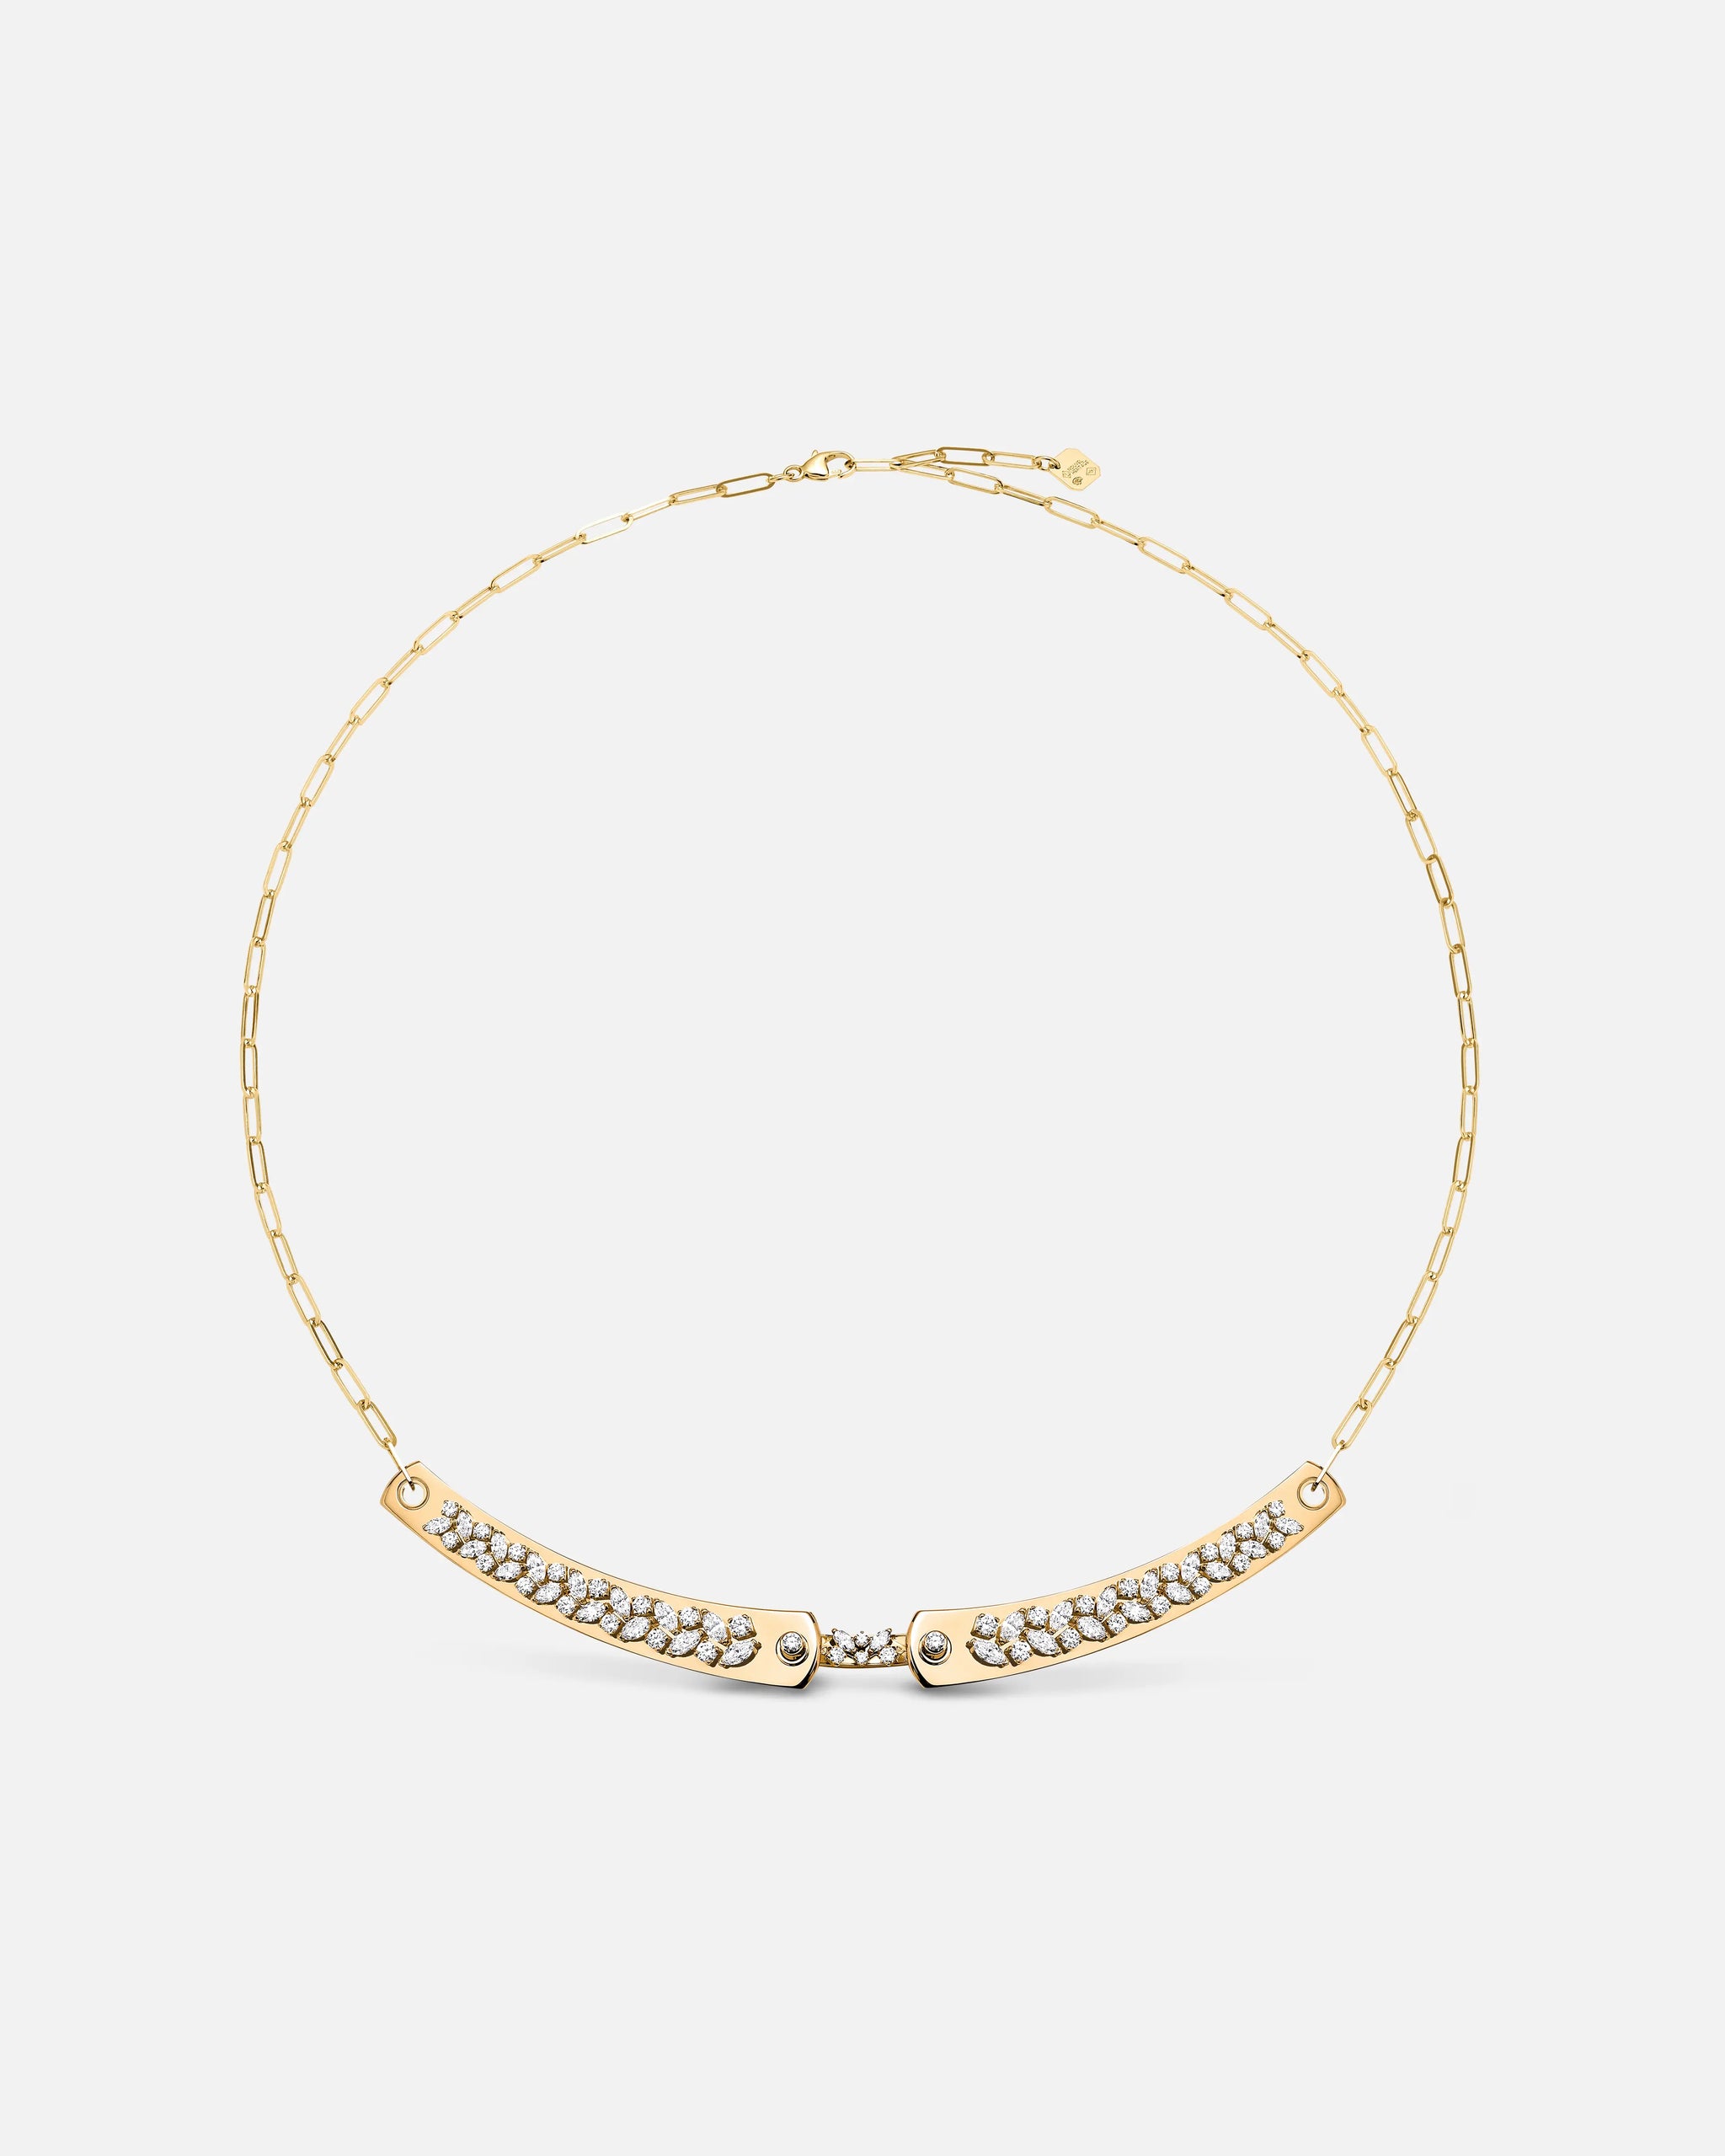 Soirée Mood Necklace in Yellow Gold - 1 - Nouvel Heritage